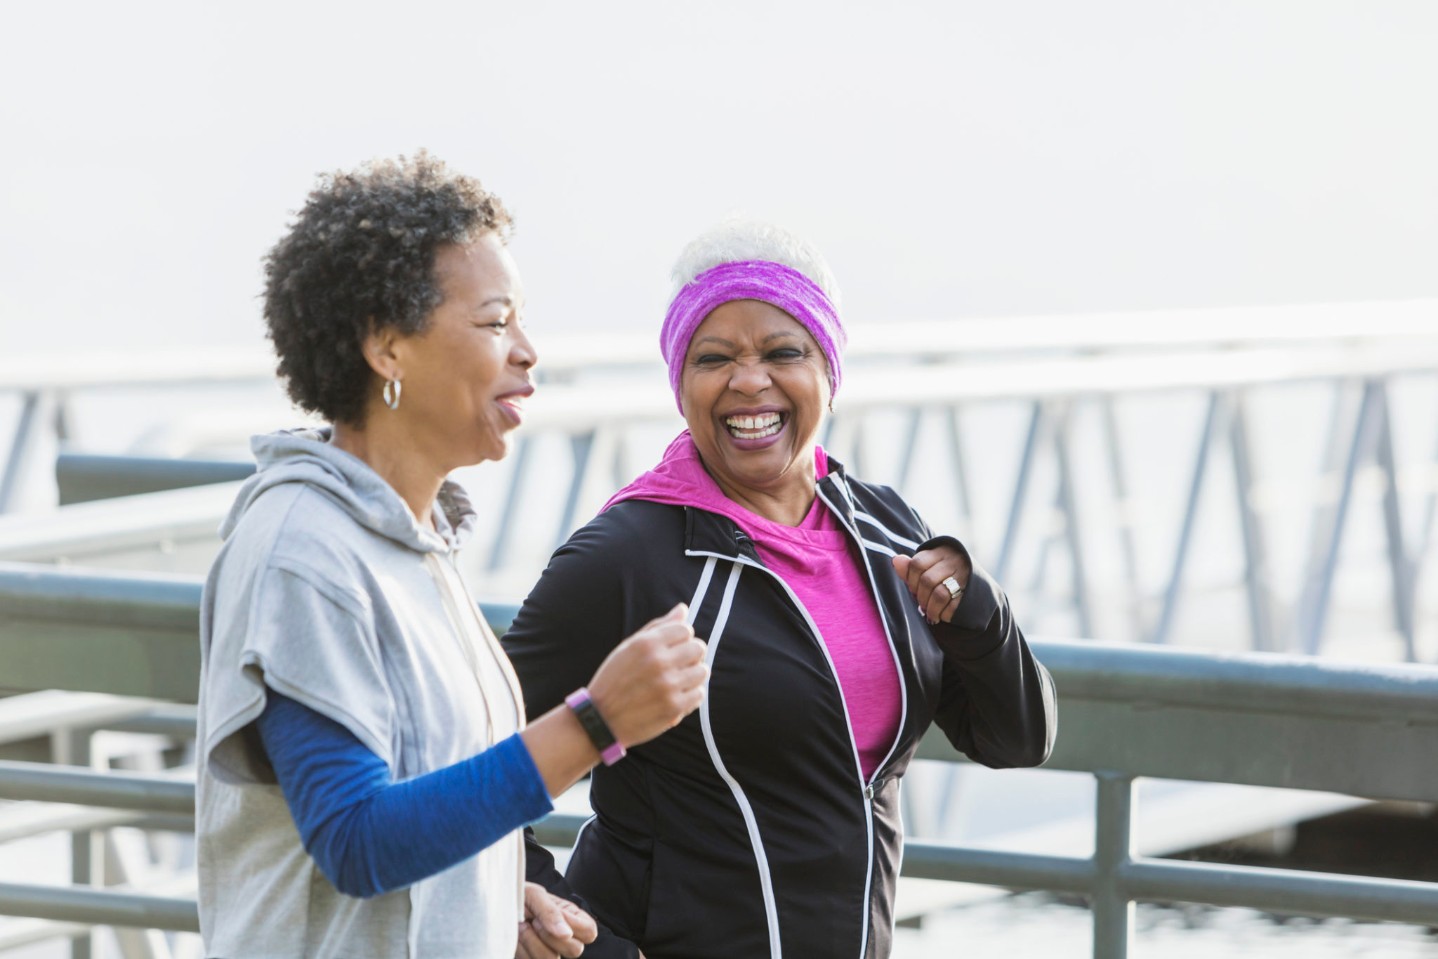 Two mature women jogging or power walking together